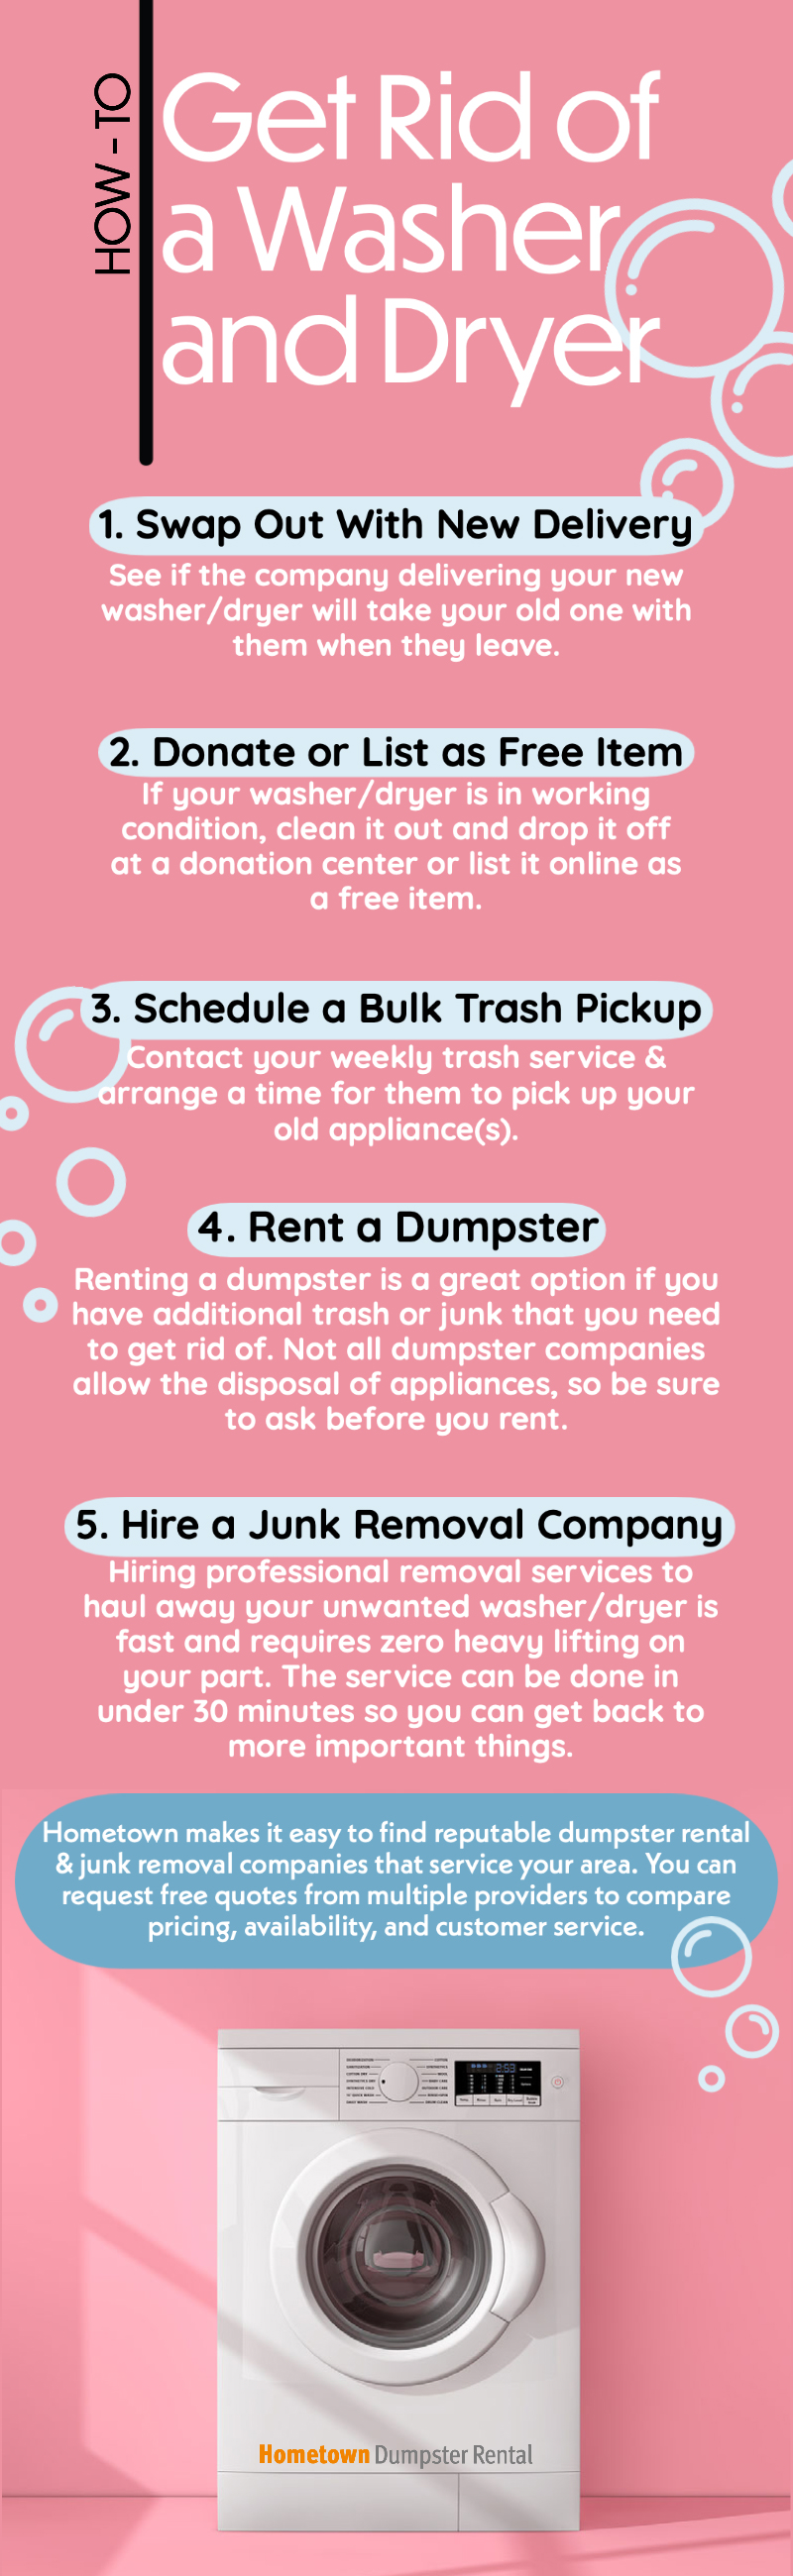 How to Get Rid of a Washer and Dryer Infographic